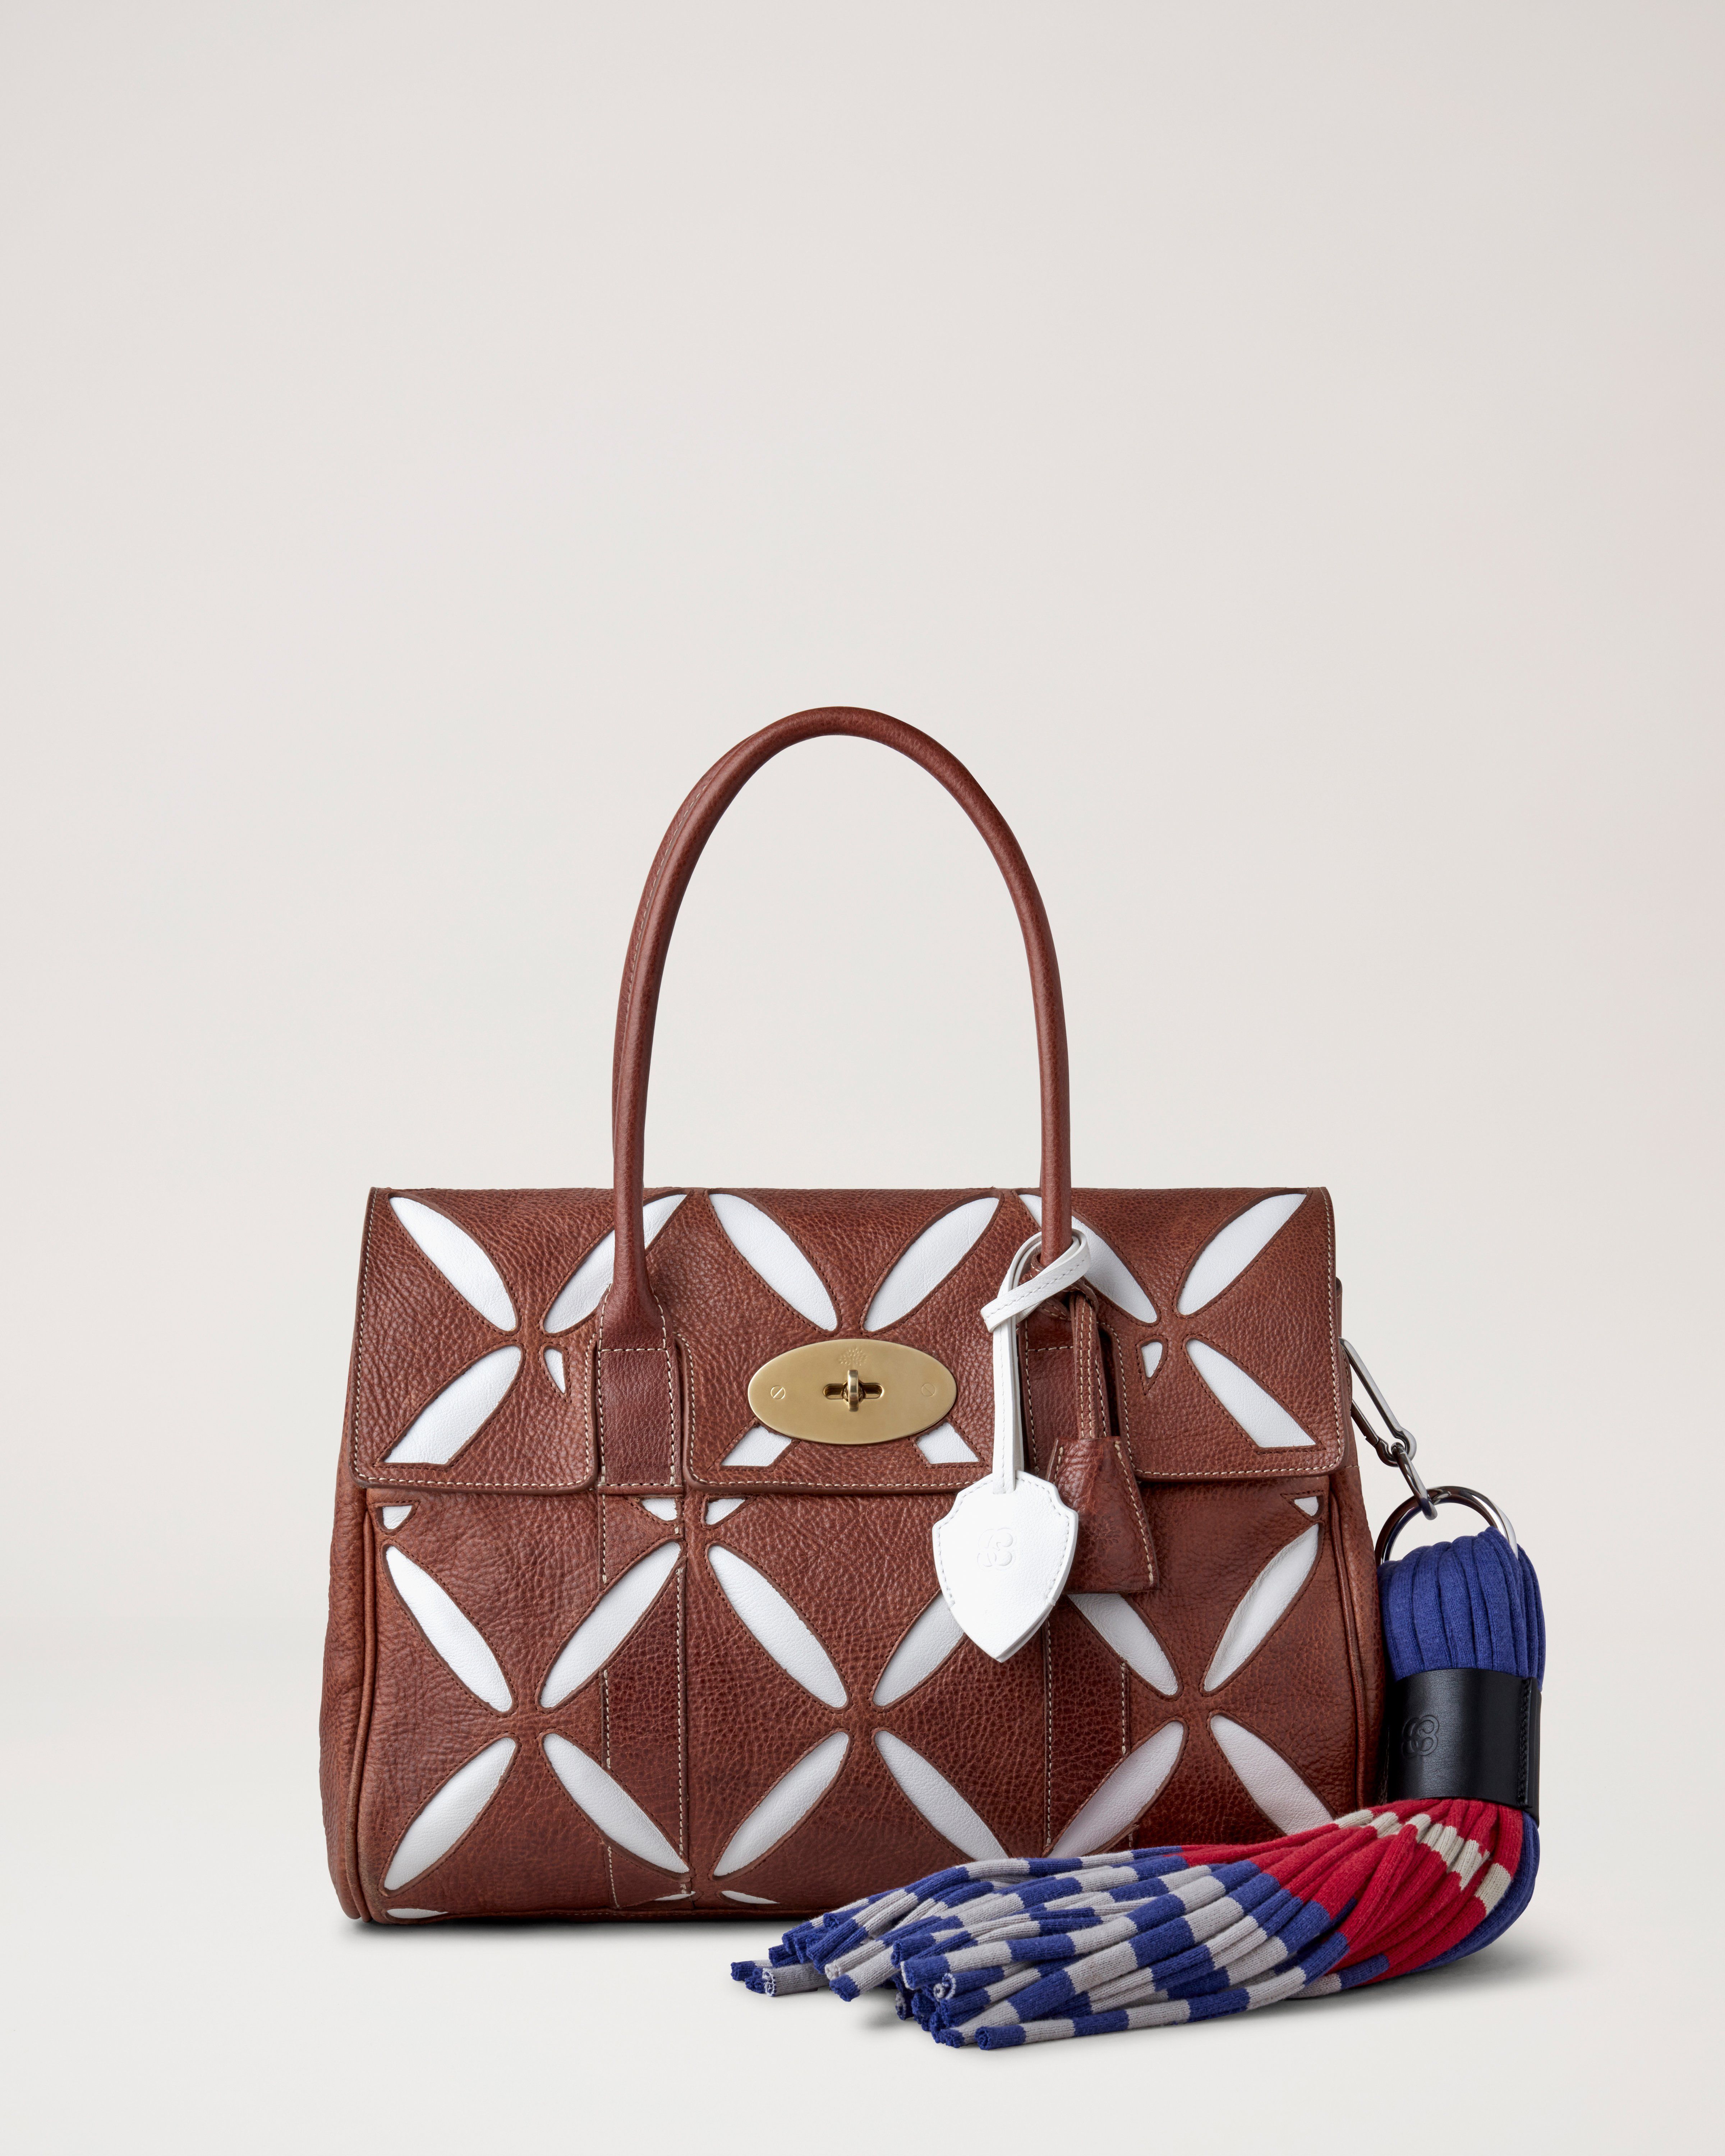 Bayswater Slash Handbag in Oak Leather from the Mulberry x Stefan Cooke collection